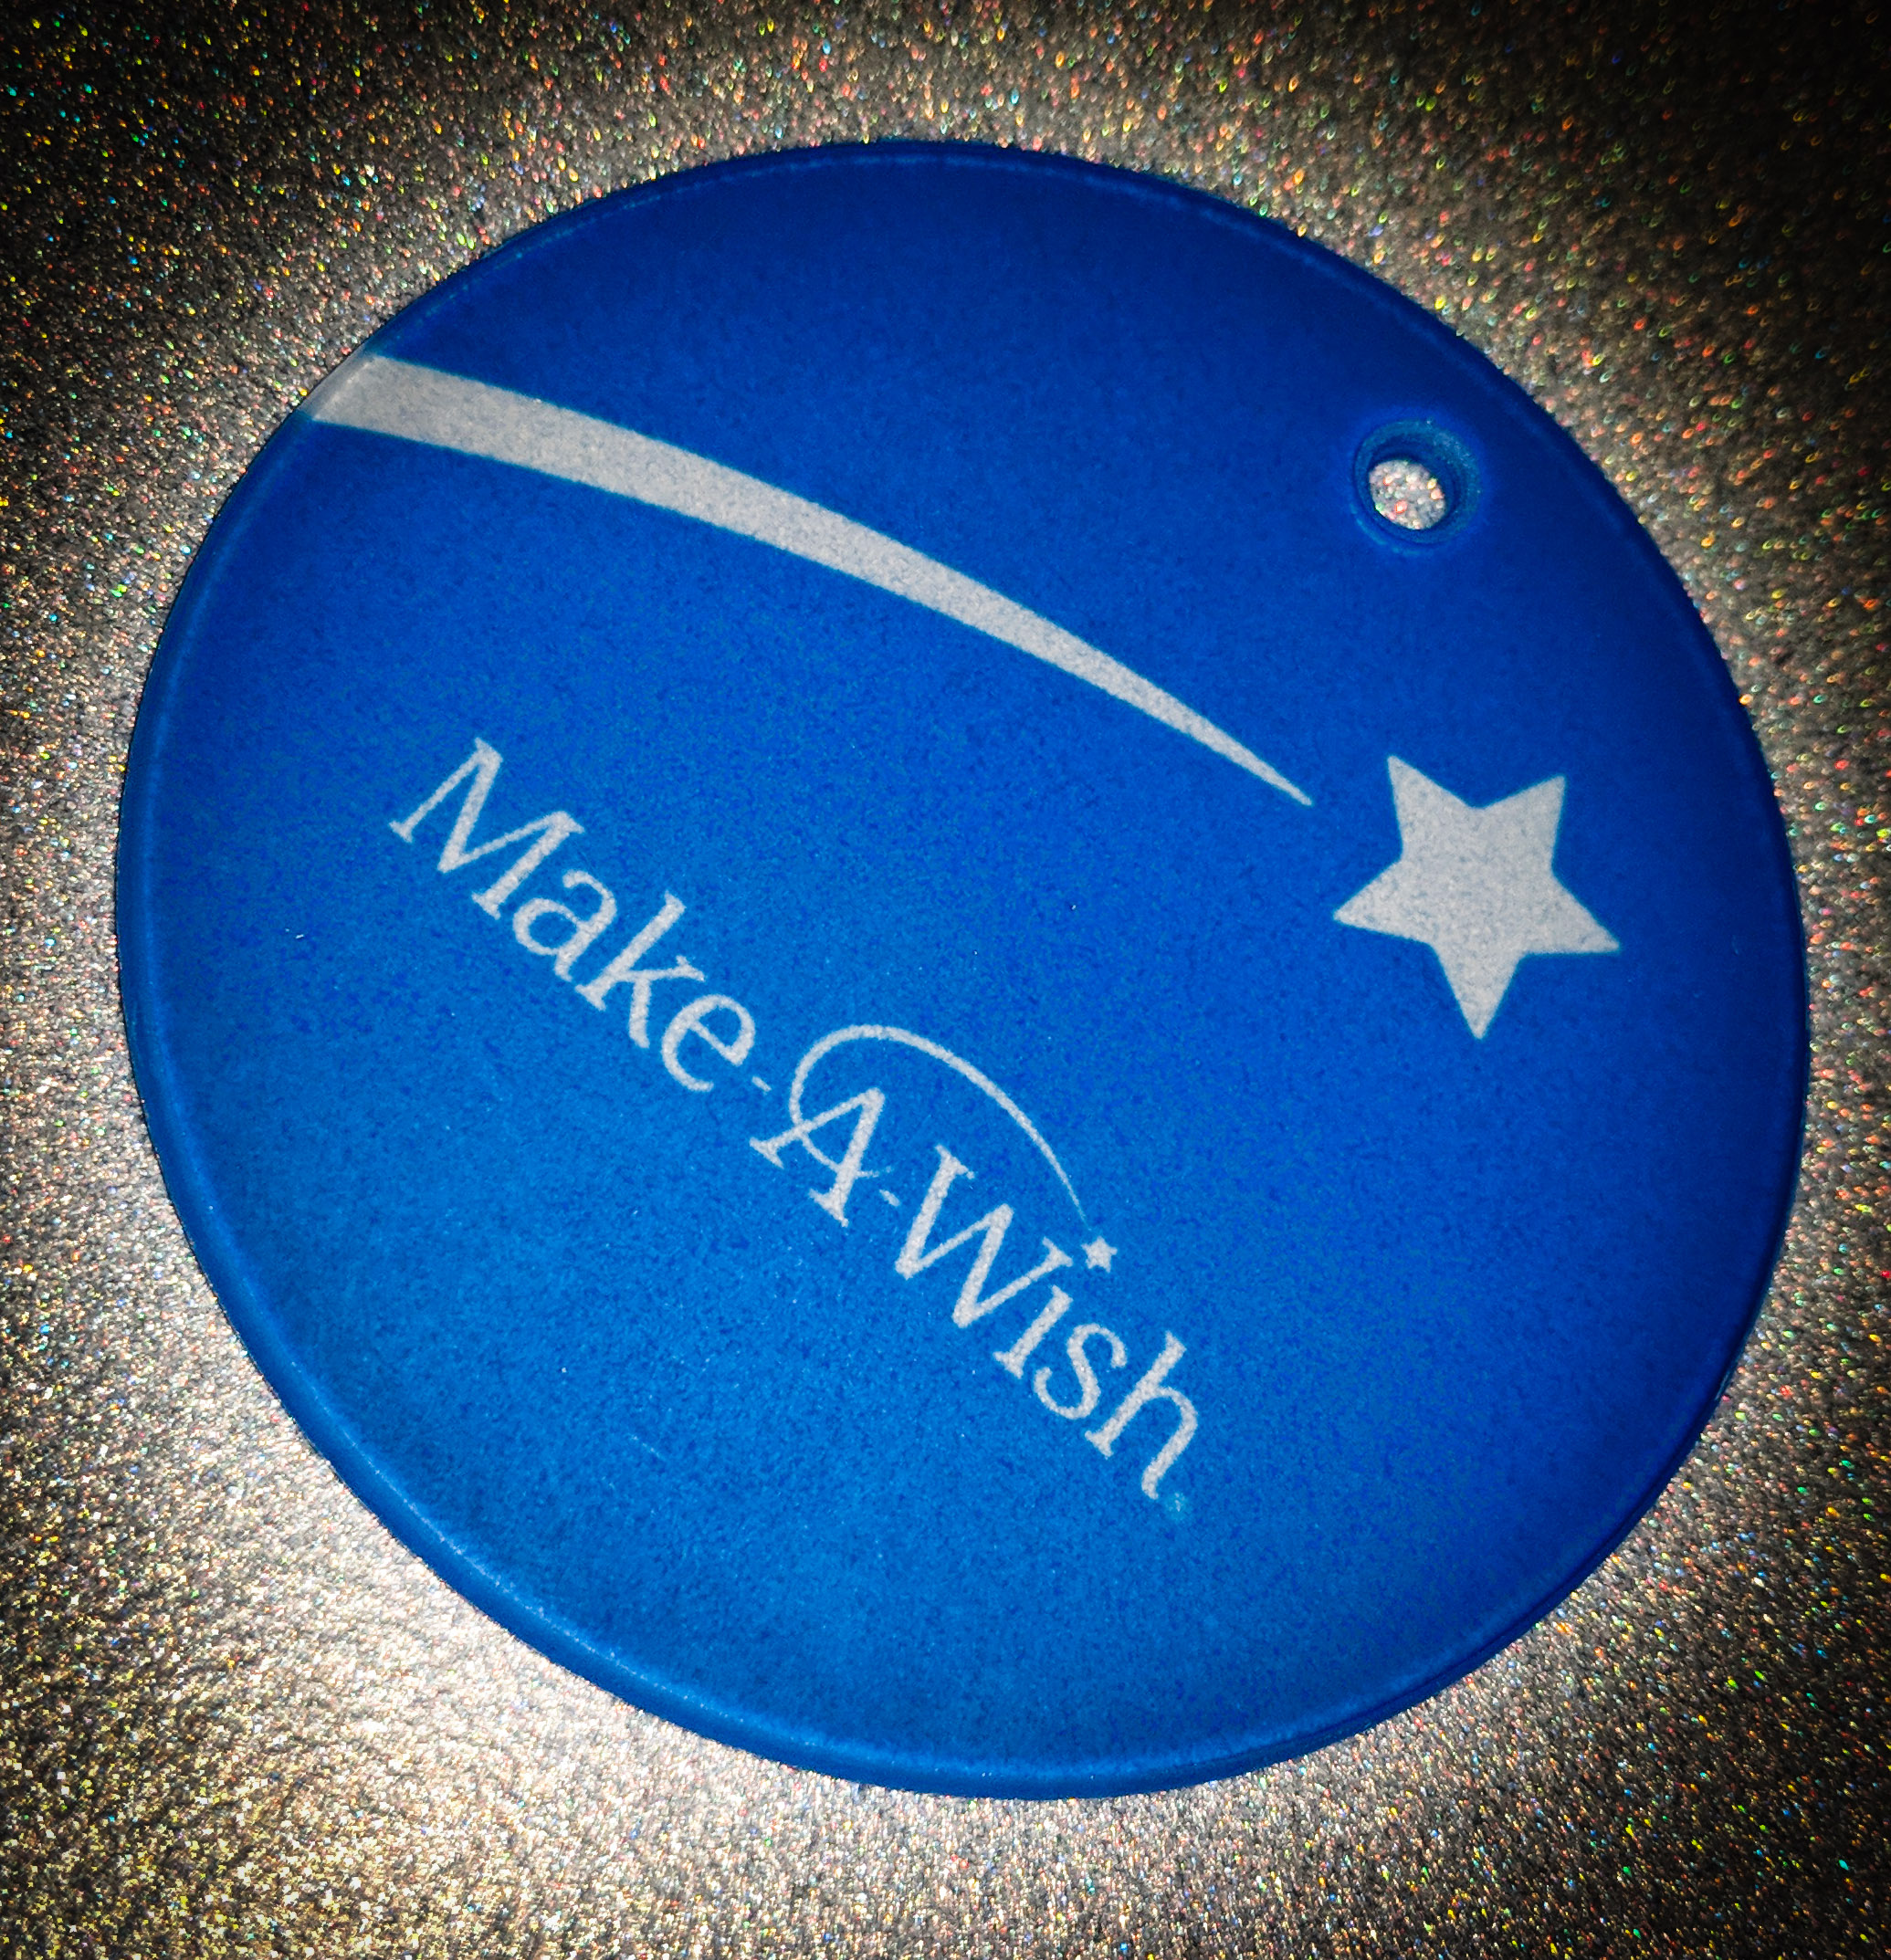 Make-A-Wish ornament given to every child and their family during each wish I grant 